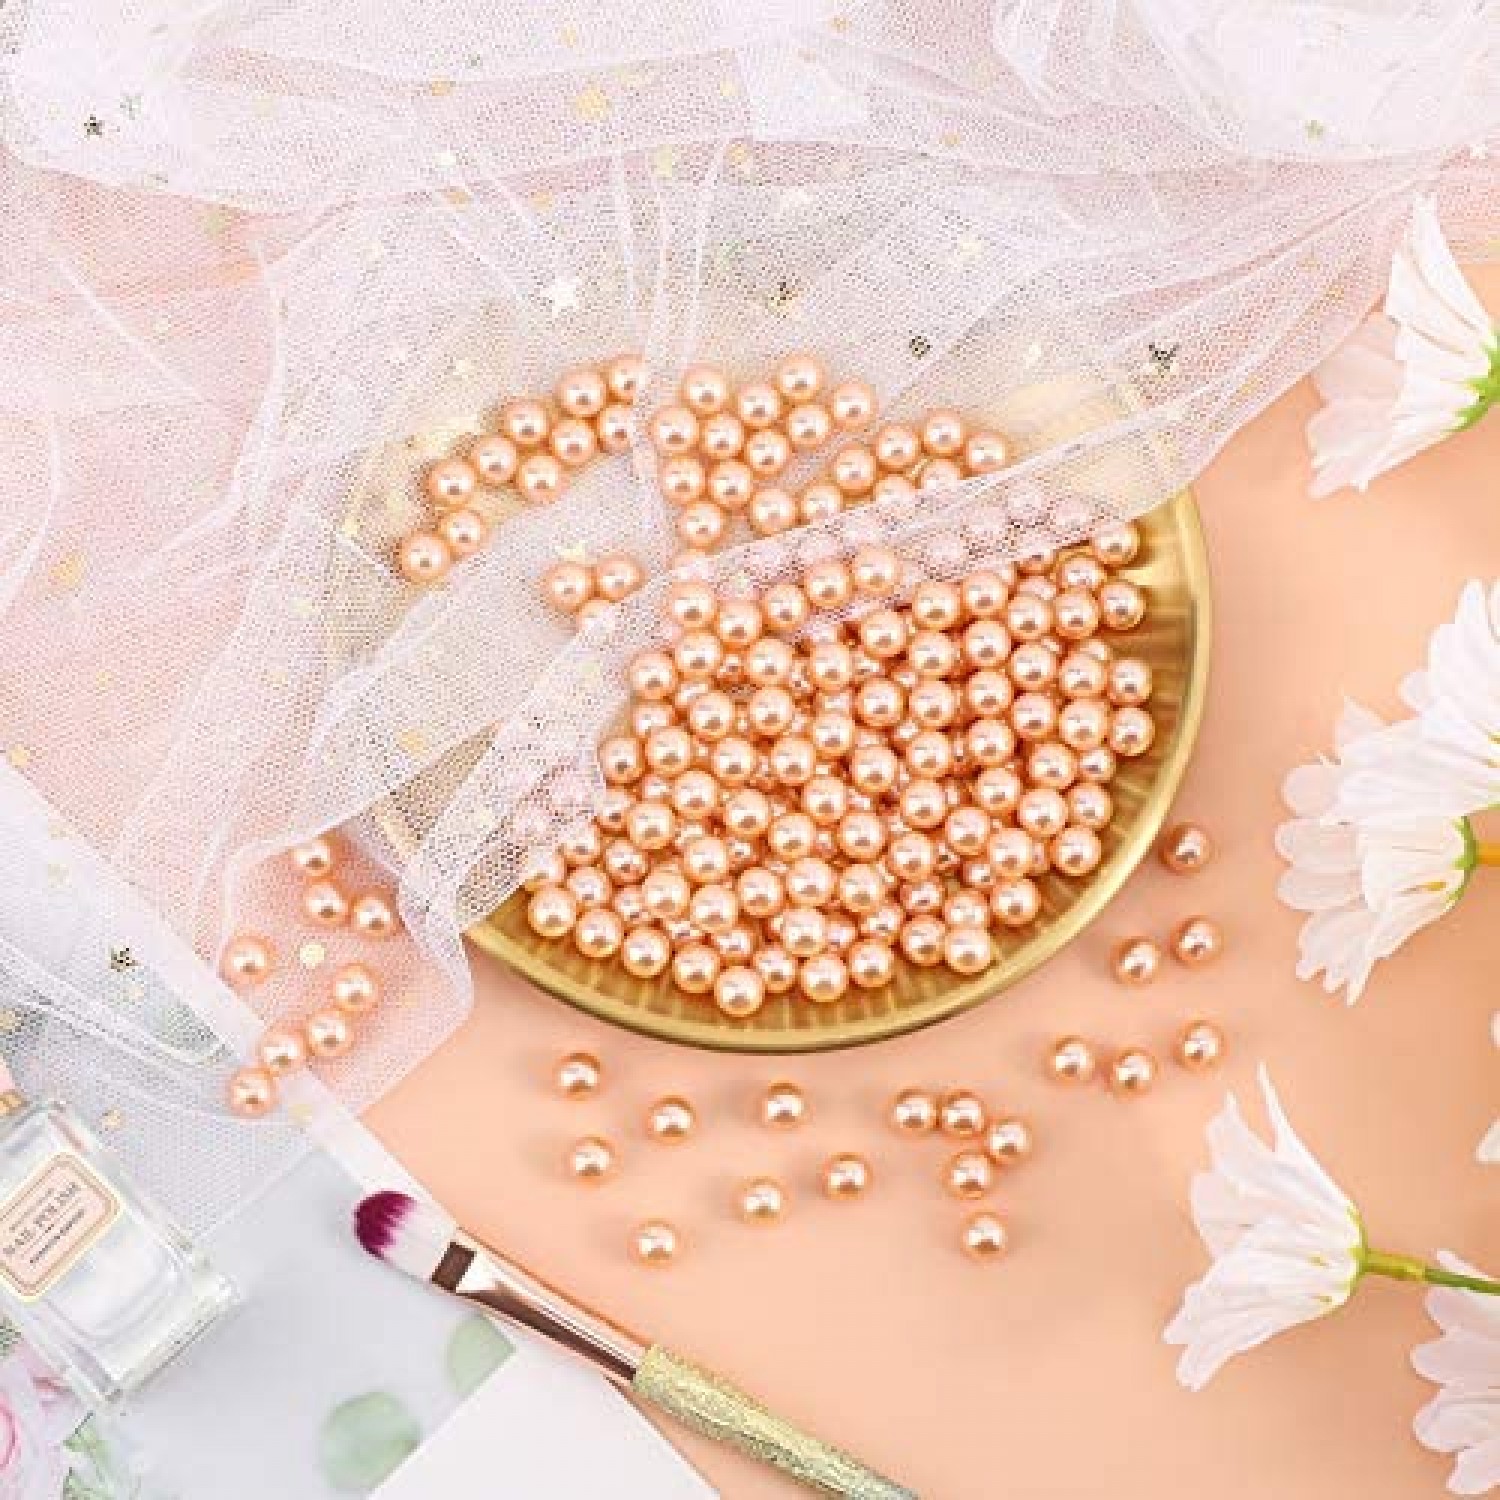 780pcs 5 Sizes Golden Pearl Beads No Holes Elegant Luster, Pearls For Crafts,  DIY, Vase Filling, Wedding, Birthday Party, Home Decoration (4mm, 5mm,6mm,  8mm,10mm)